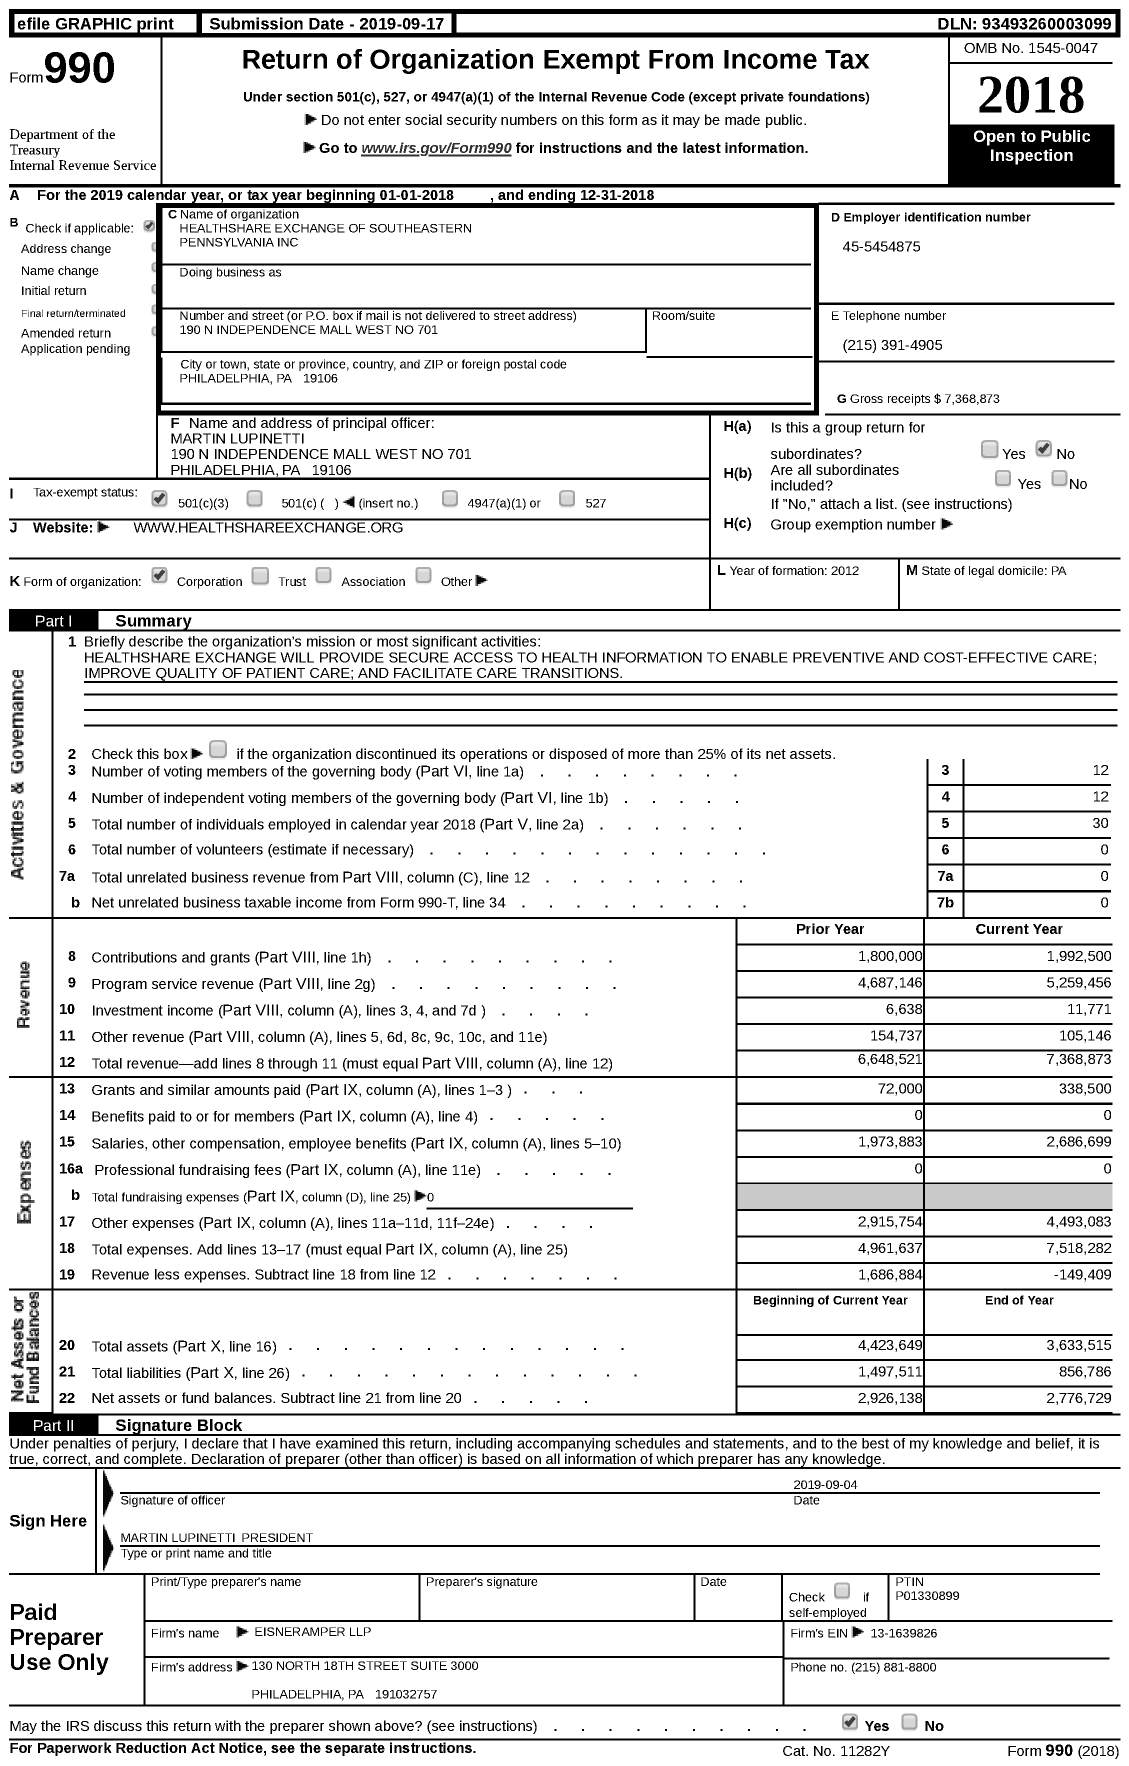 Image of first page of 2018 Form 990 for Healthshare Exchange of Southeastern Pennsylvania (HSX)